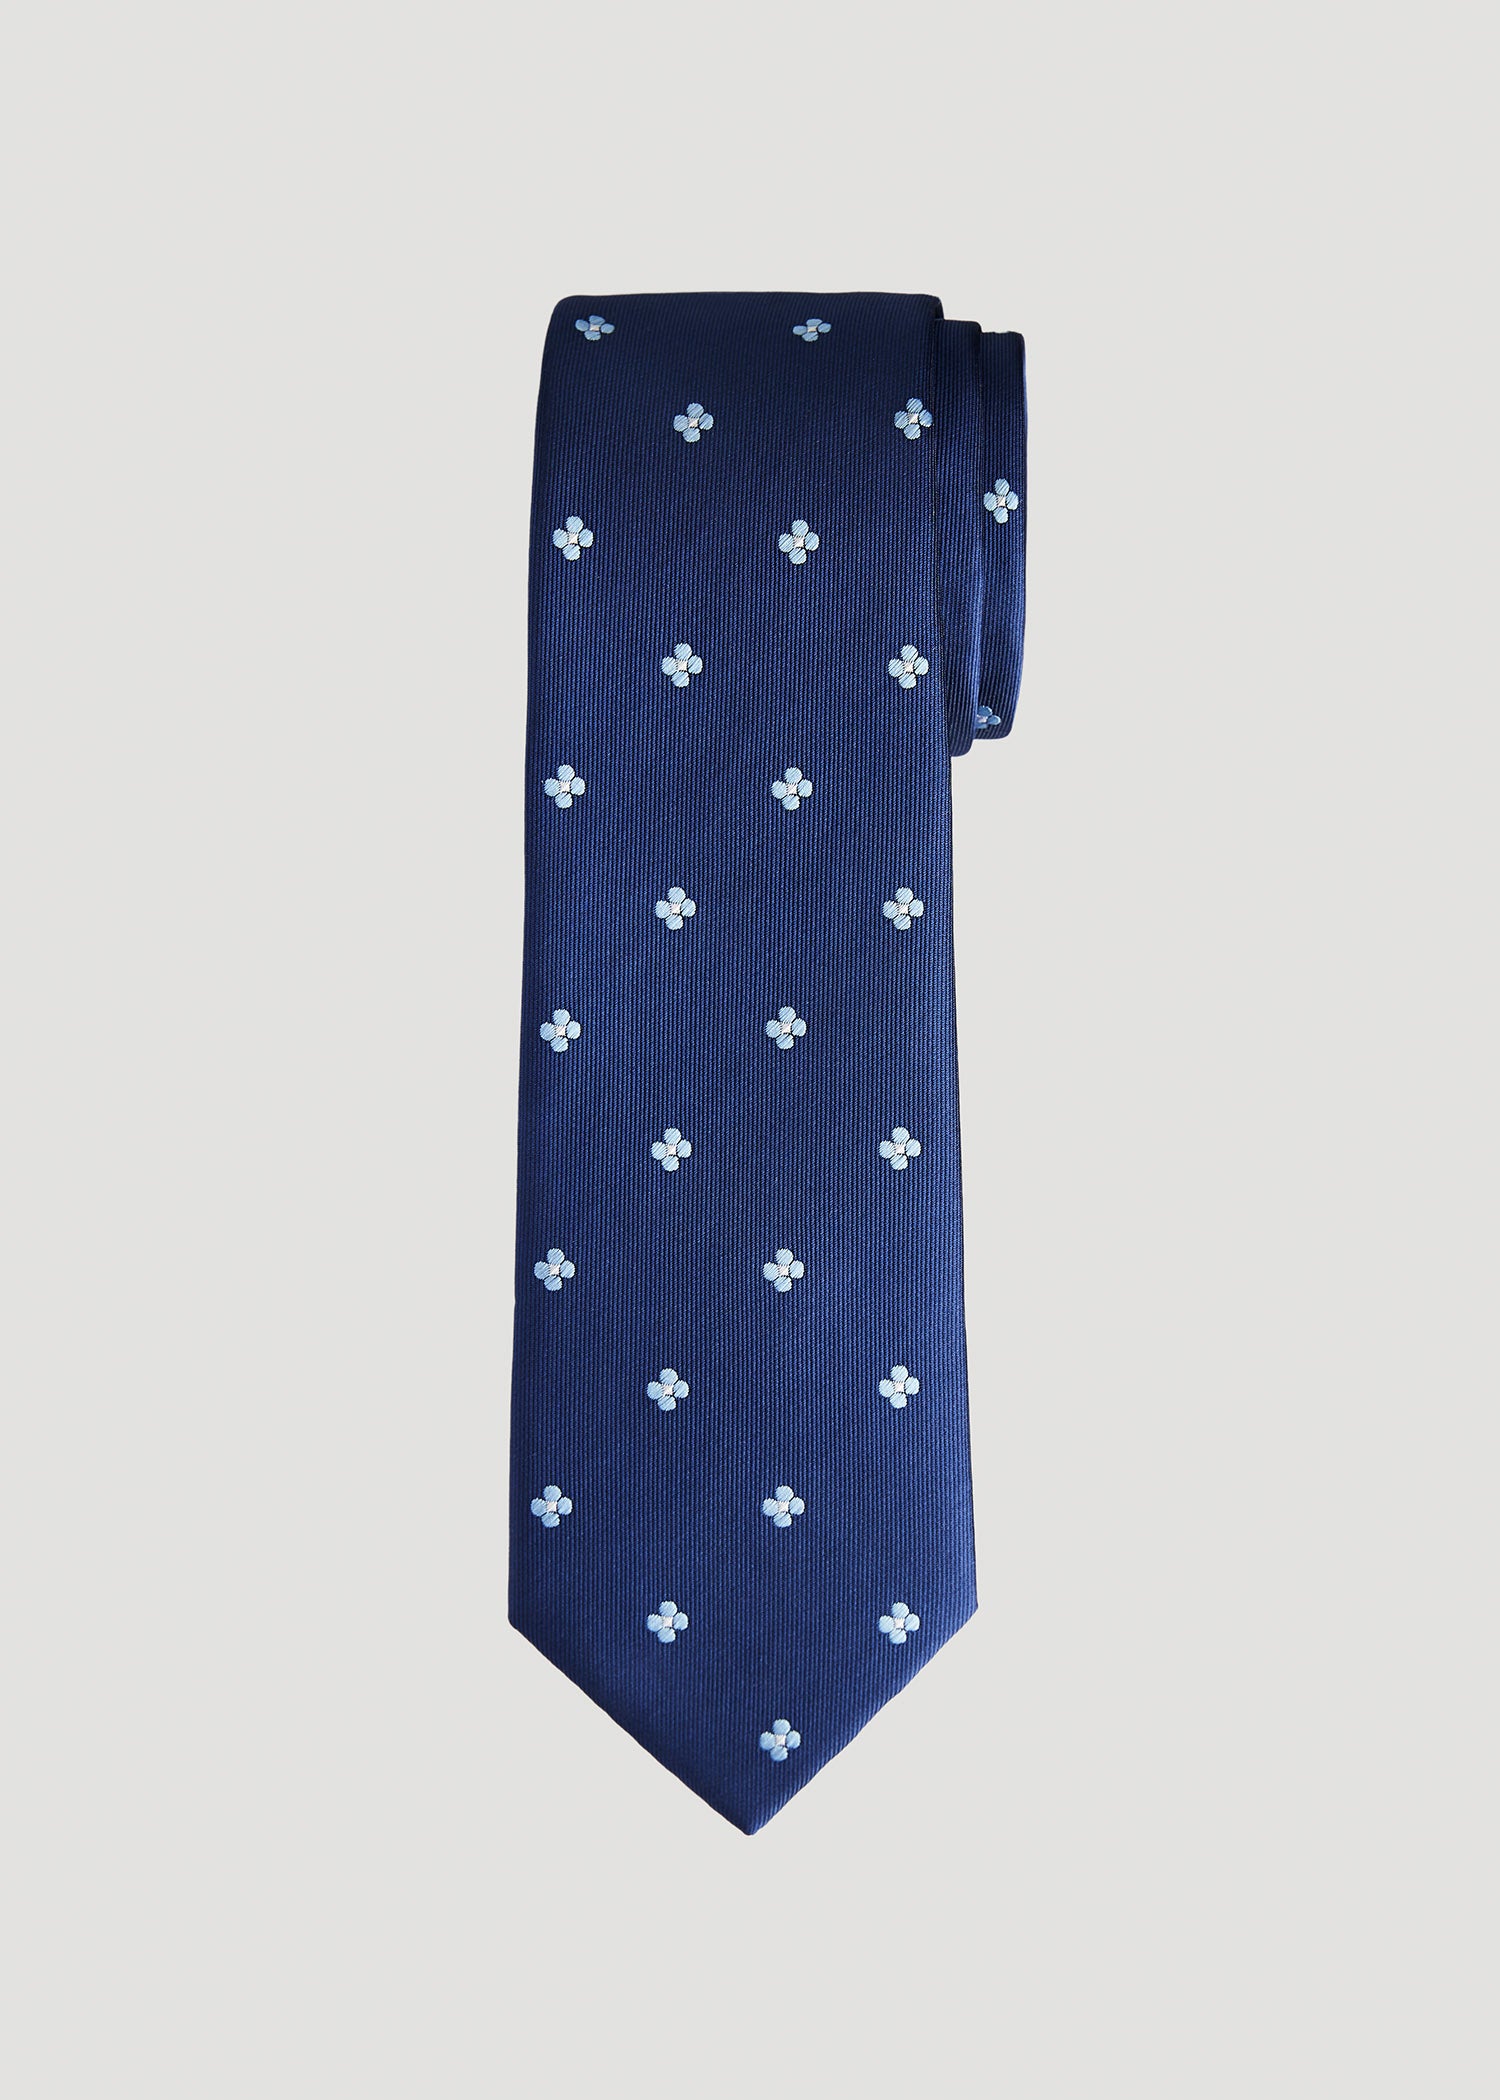    American-Tall-Men-Tie-Blue-Floral-Print-Front